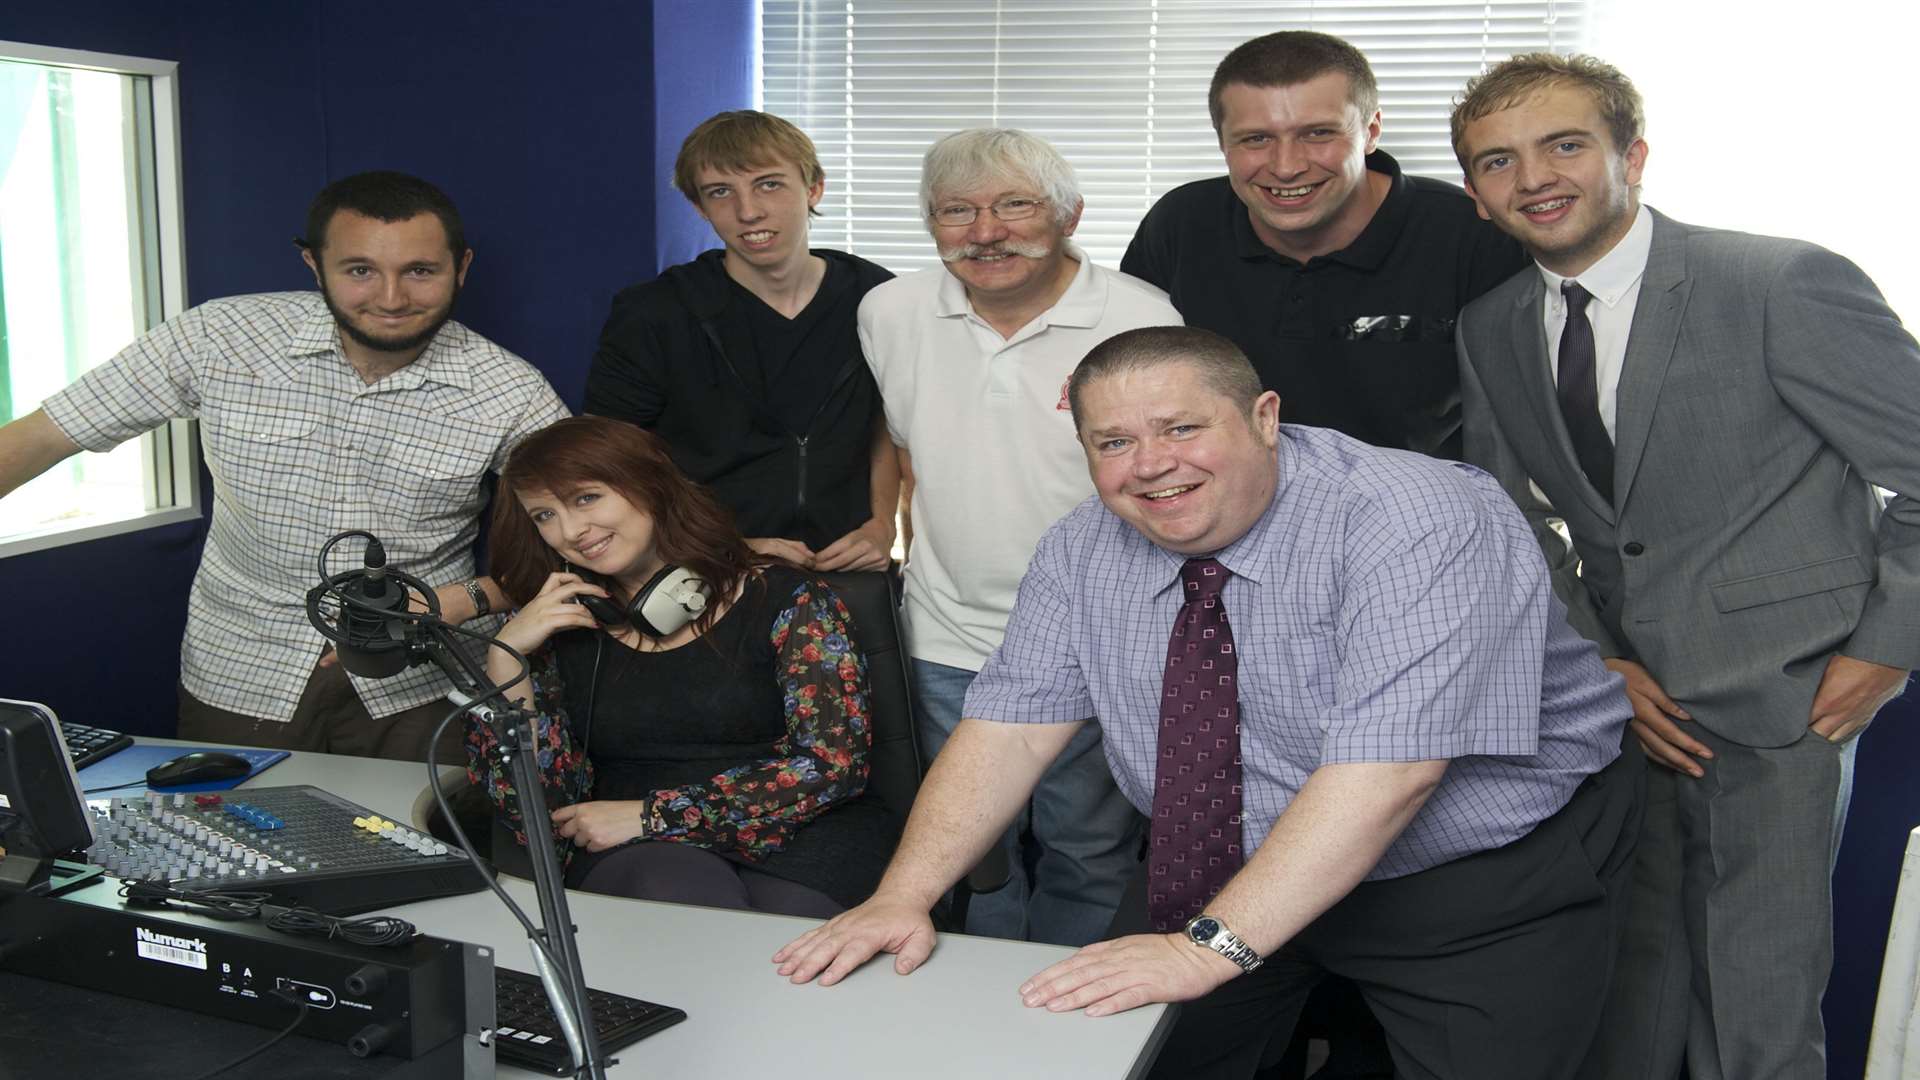 The Sfm team when it launched five years ago. From left, Sam Wood, Becky Thornton, Ryan Upton, Roger Rapson, Peter Flynn, Dan Pope and Oliver Field.